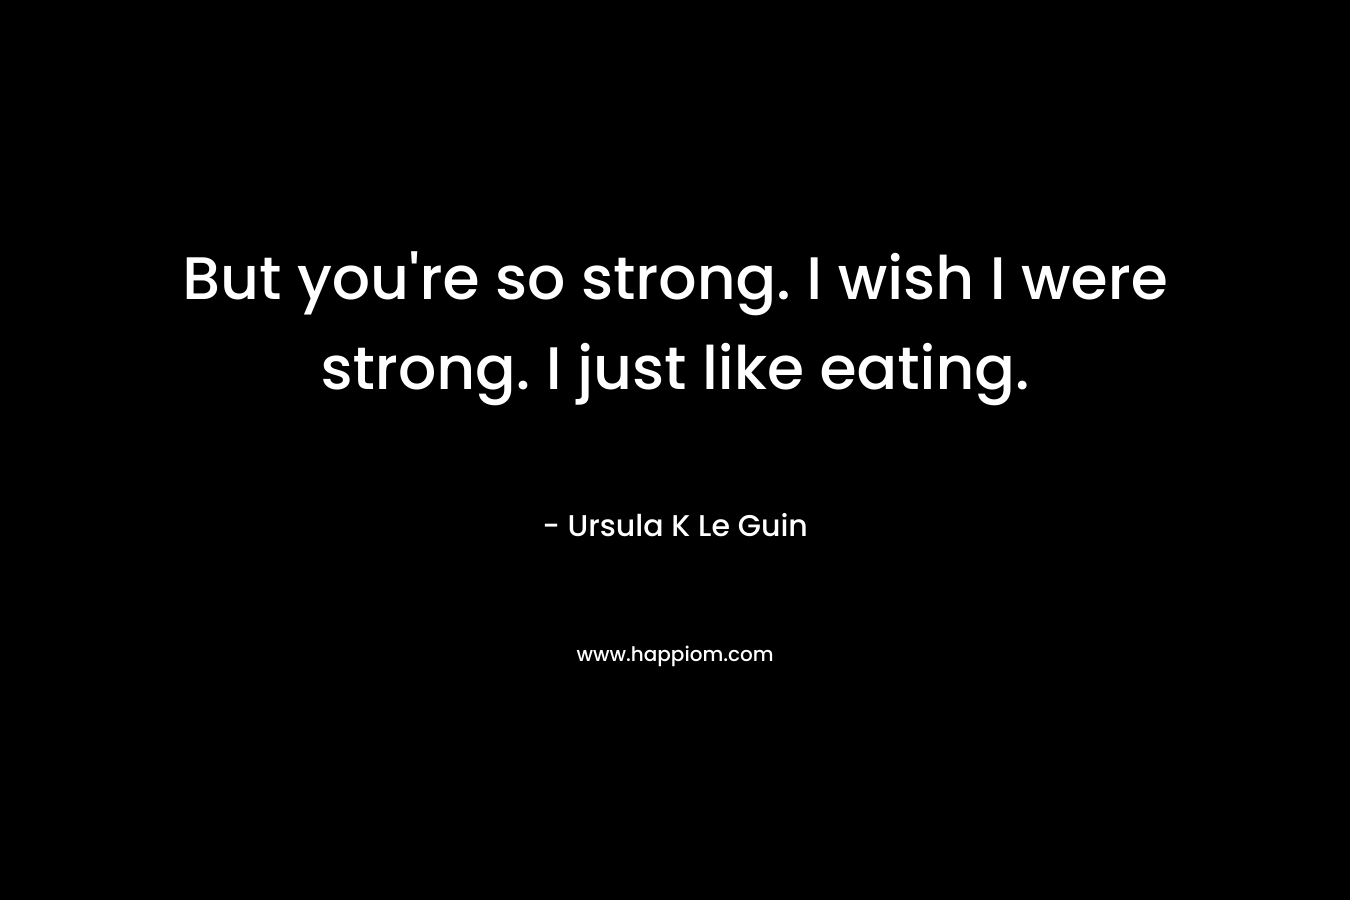 But you're so strong. I wish I were strong. I just like eating.